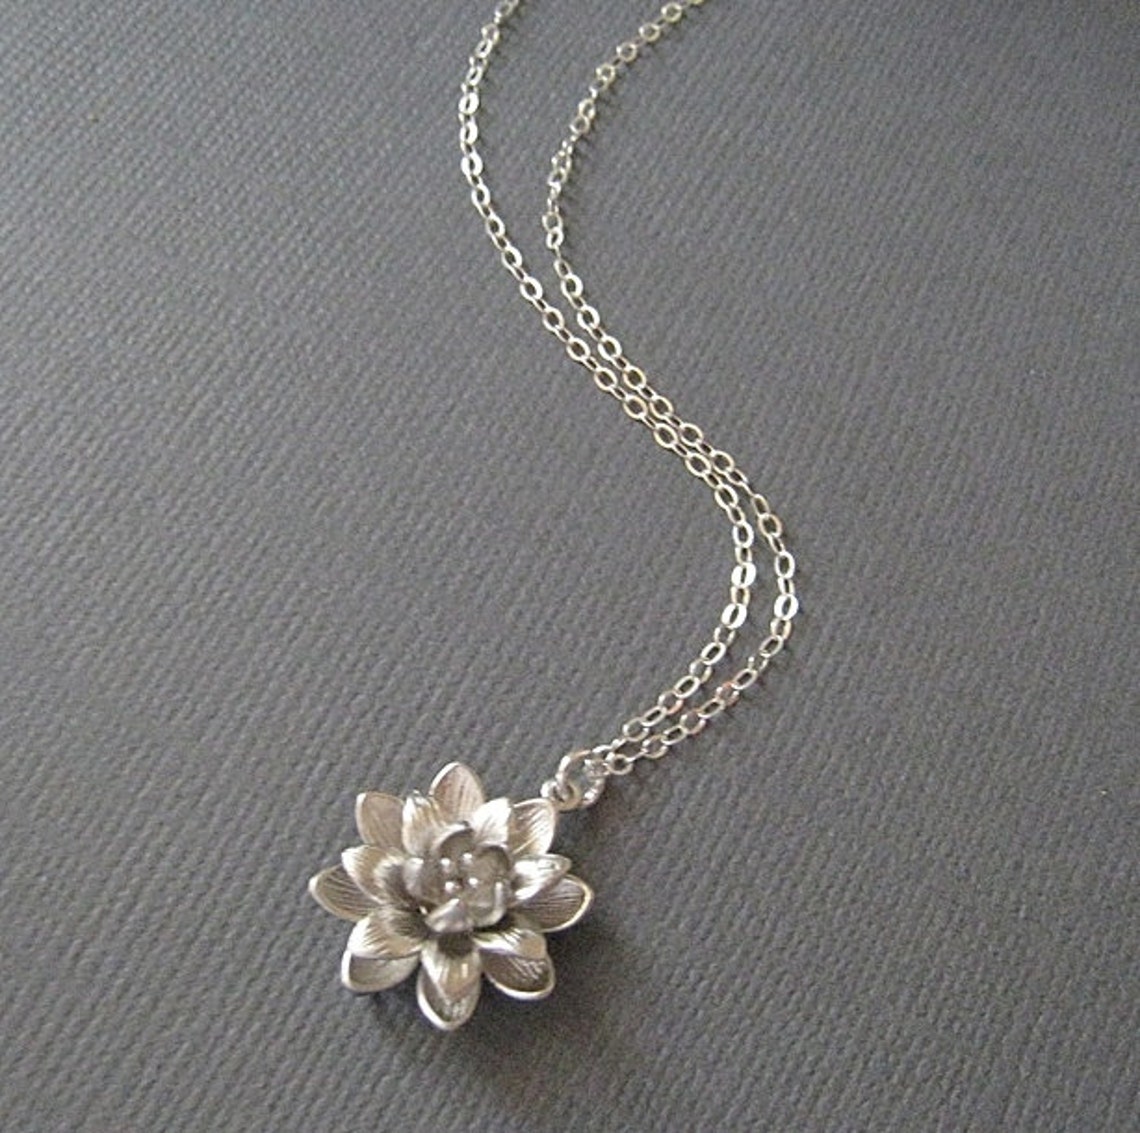 Multi Flower Necklace in STERLING SILVER CHAINFlora | Etsy